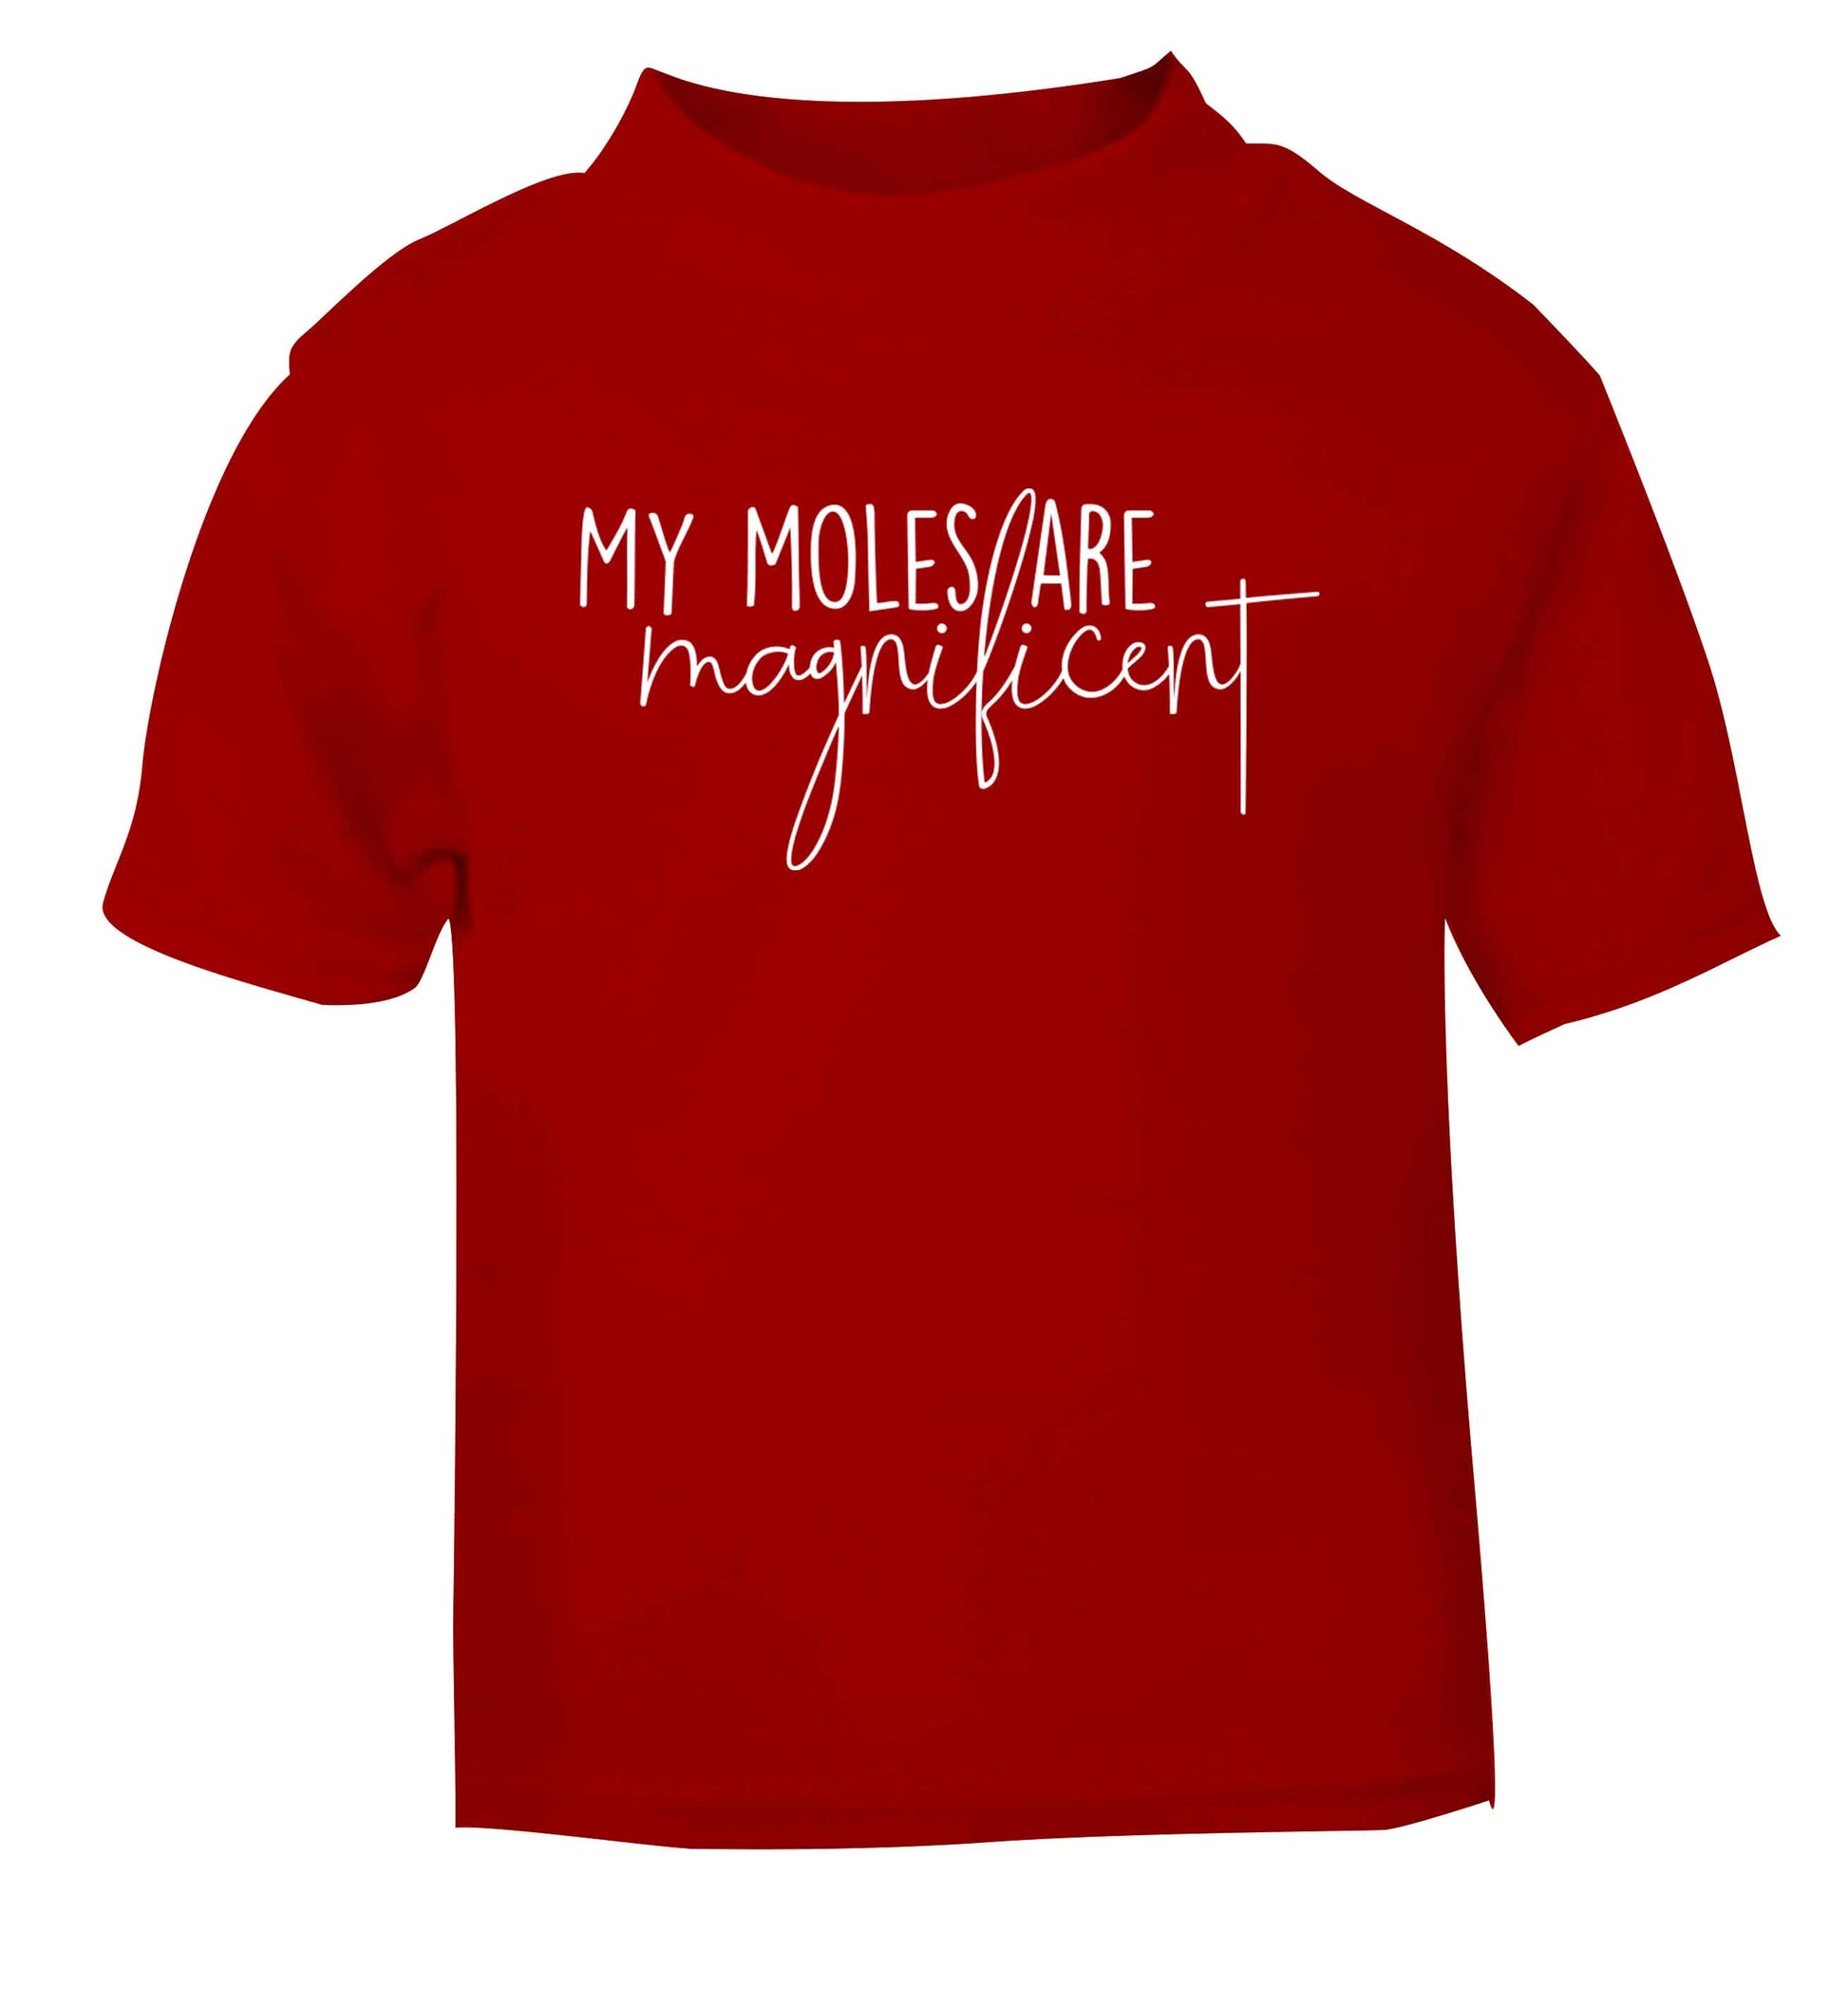 My moles are magnificent red baby toddler Tshirt 2 Years